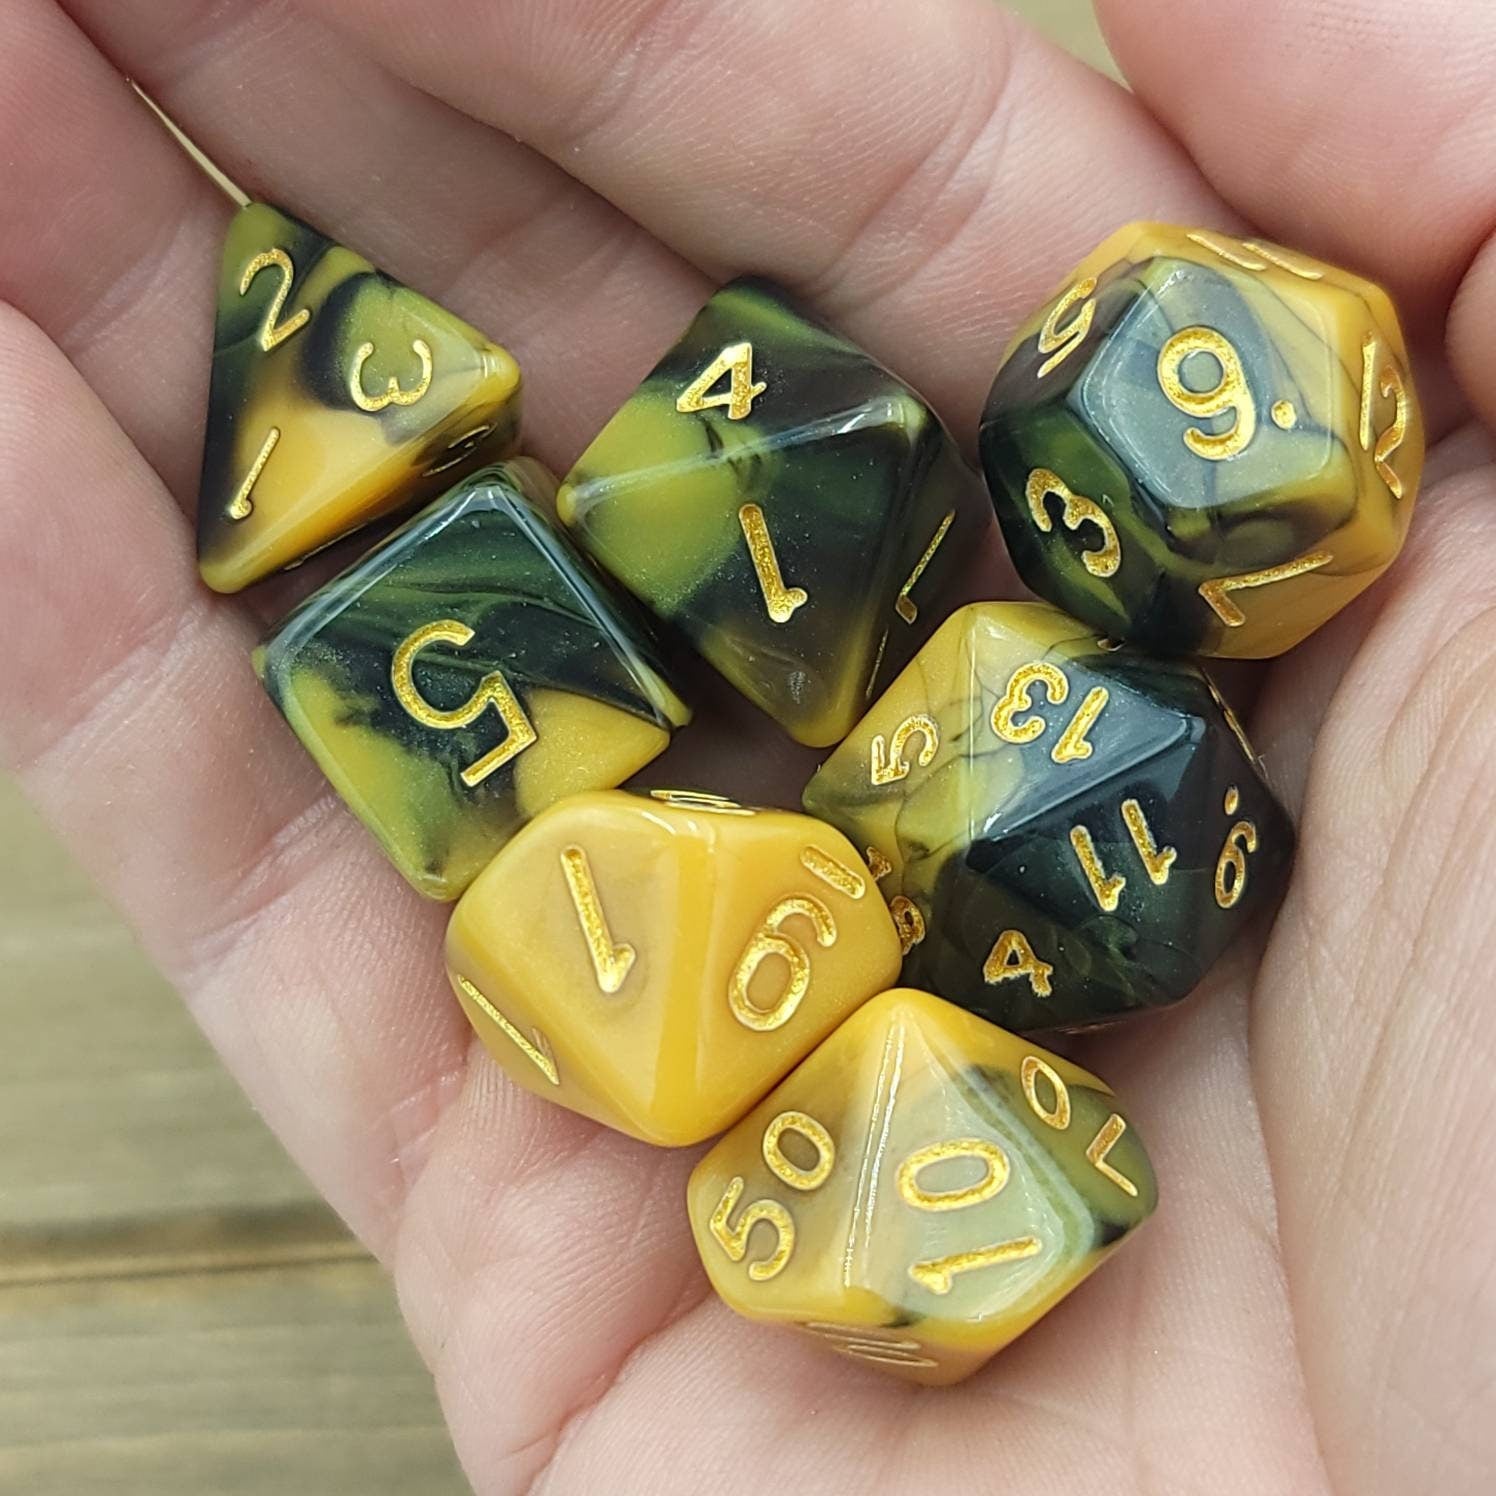 Yellowjacket | RPG Dice Set| RPG Dice | Polyhedral Dice Set | Dungeons and Dragons | DnD Dice Set | Gaming Dice Set